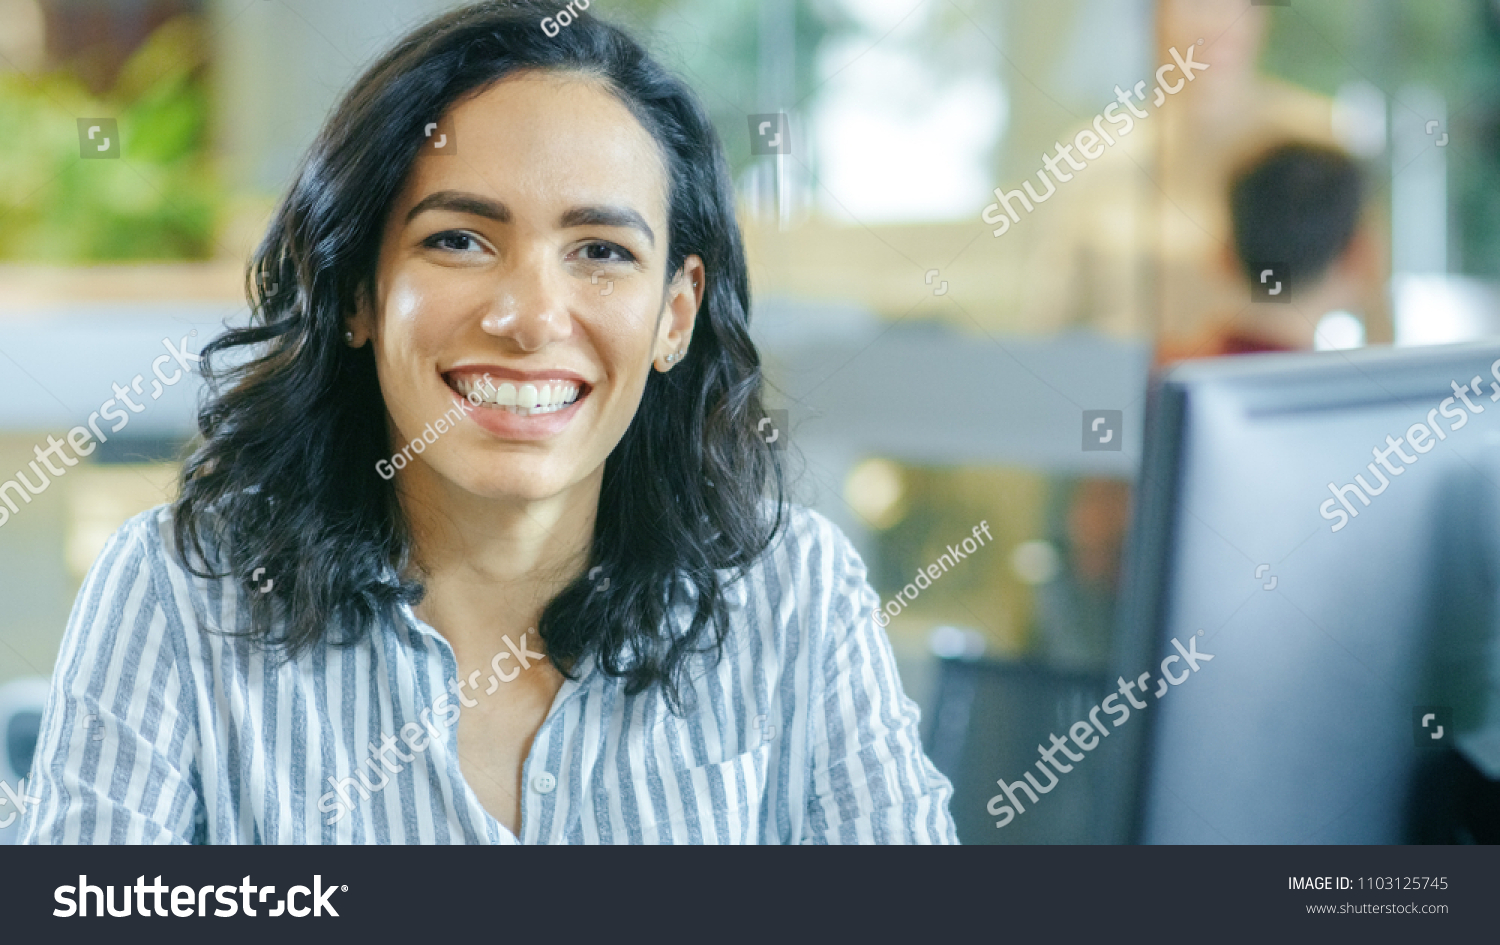 Portrait Shot of a Beautiful Young Hispanic Woman Working on a Computer, Smiling Warmly on the Camera. In the Background Busy Office with Working Colleagues. #1103125745